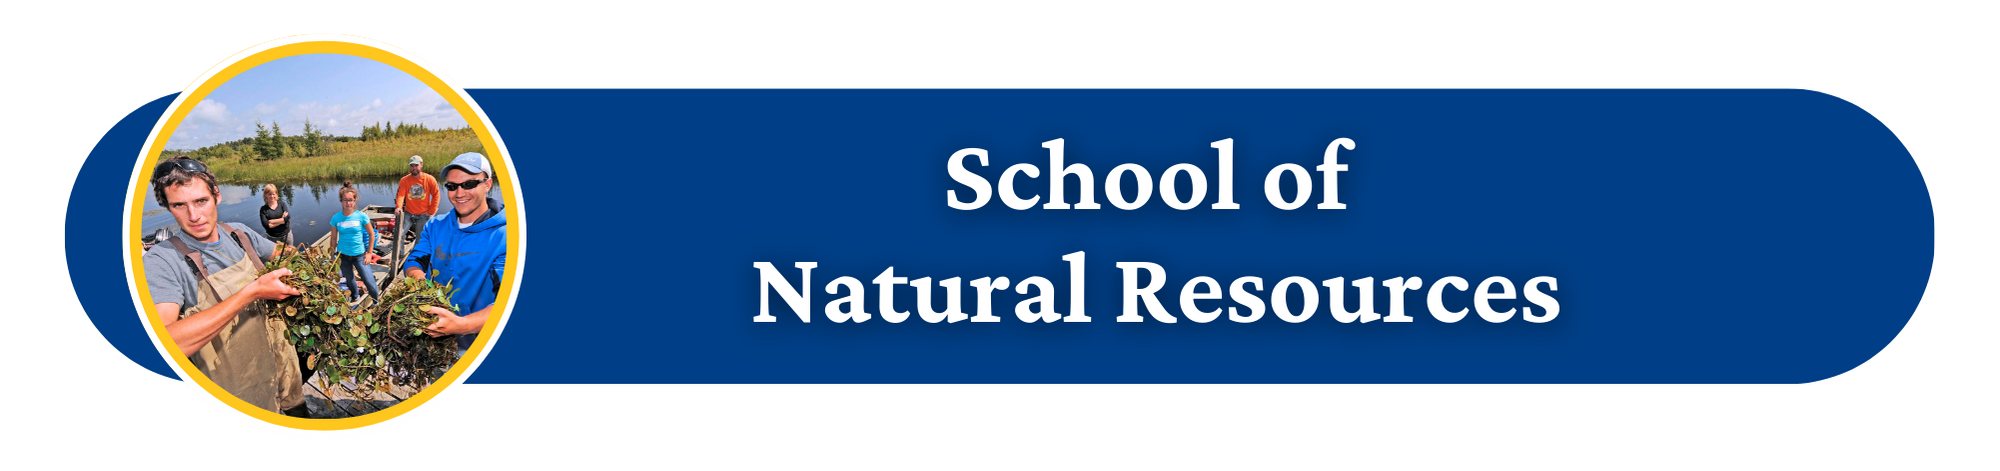 School of Natural Resources Button